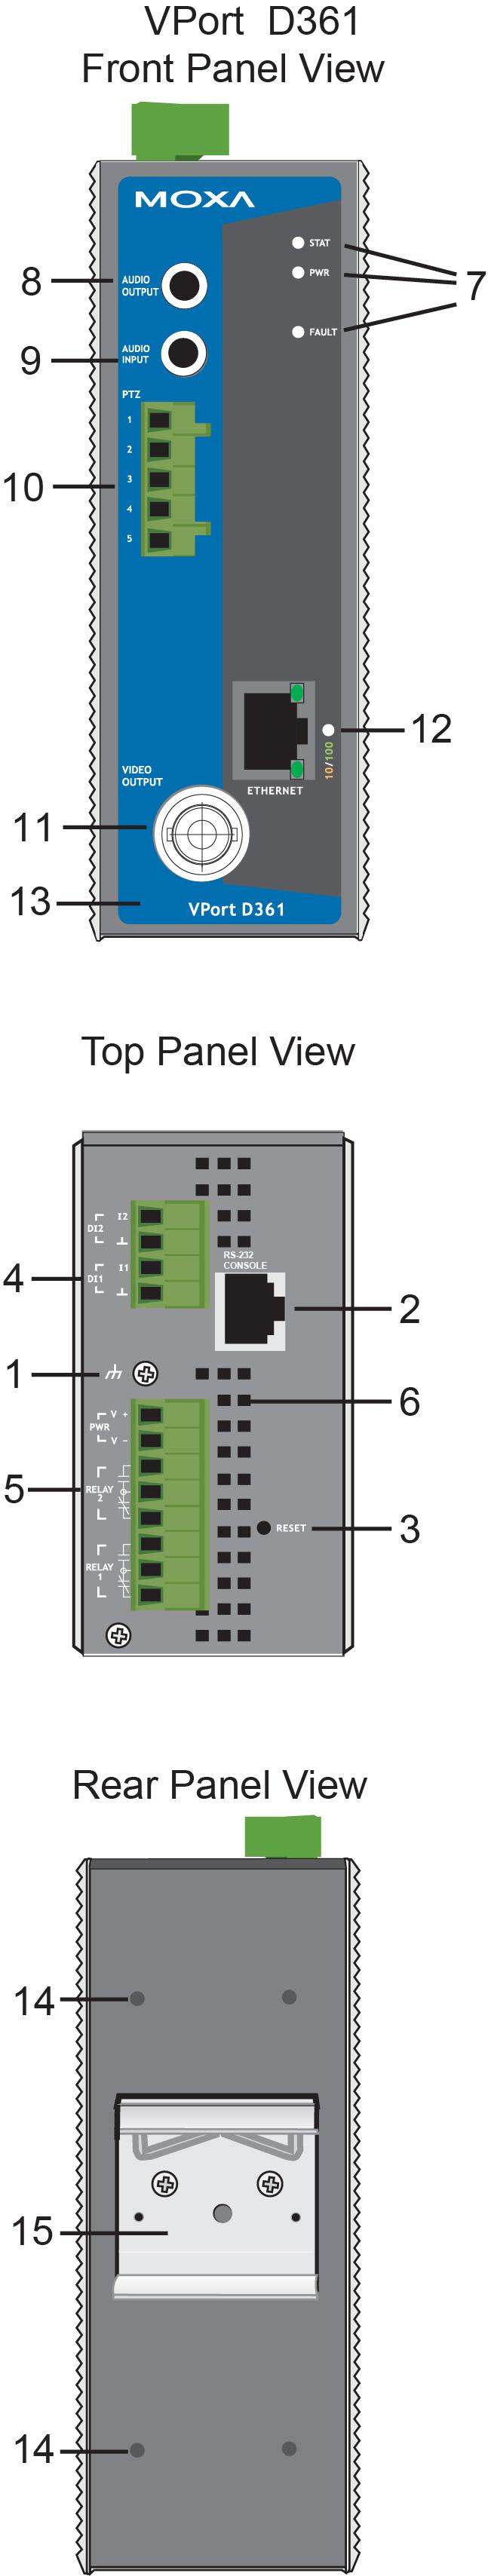 Introduction Panel Layout of the VPort D361 1. Grounding screw 2. RS-232 console port 3. Hardware reset button 4. 4-pin terminal block for DI 1 and DI 2 5.